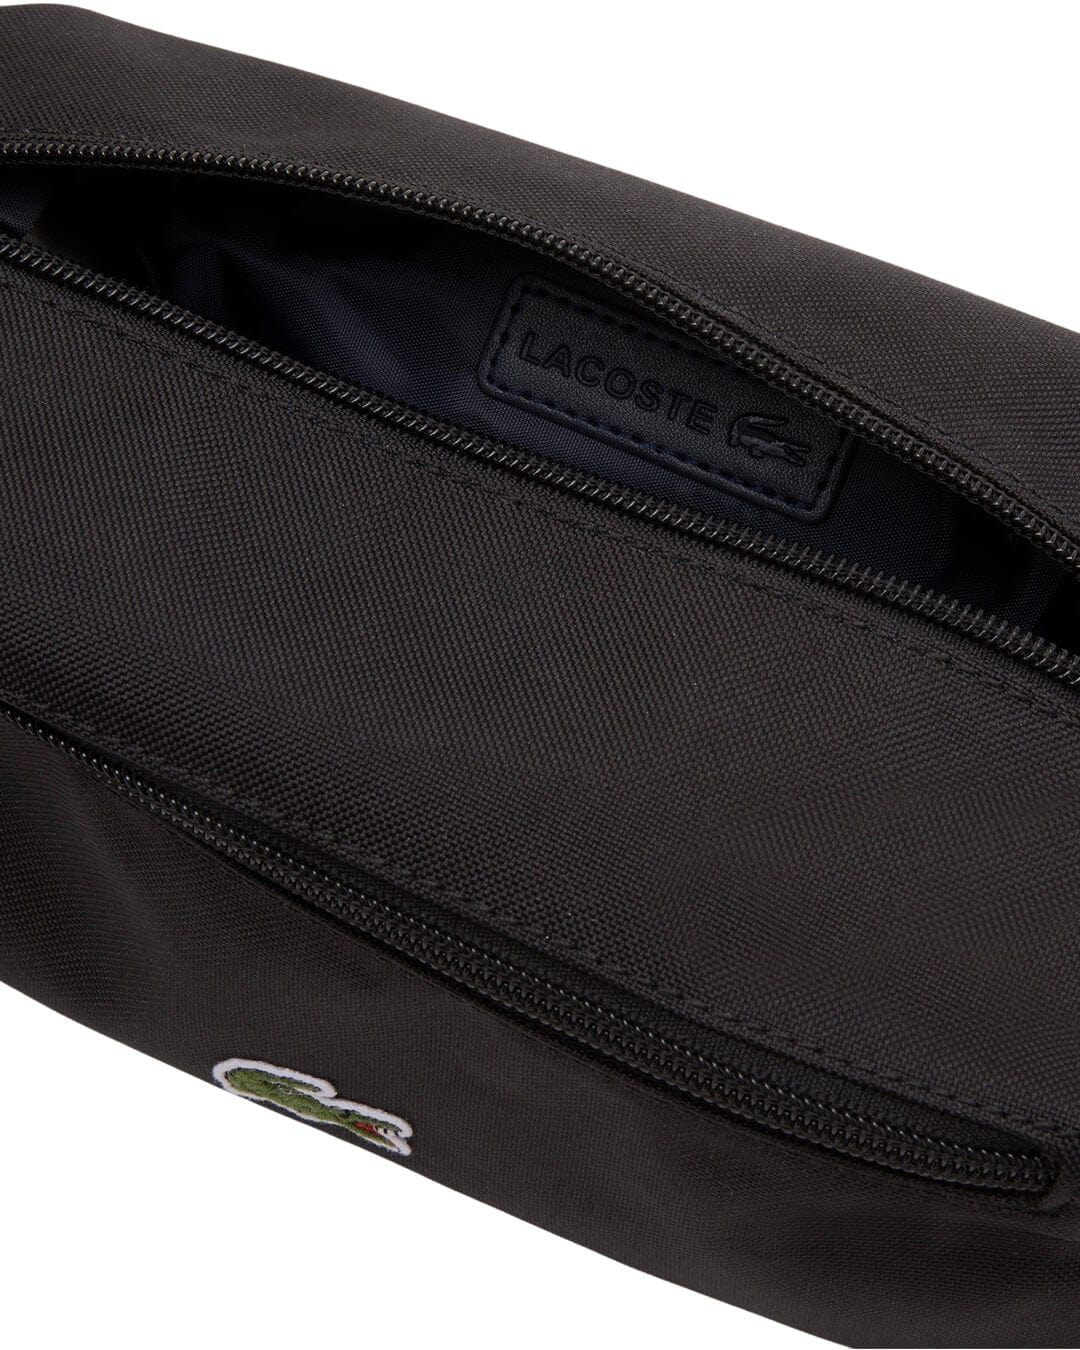 Lacoste Bags ONE Lacoste Black Unisex Zippered Toiletry Bag